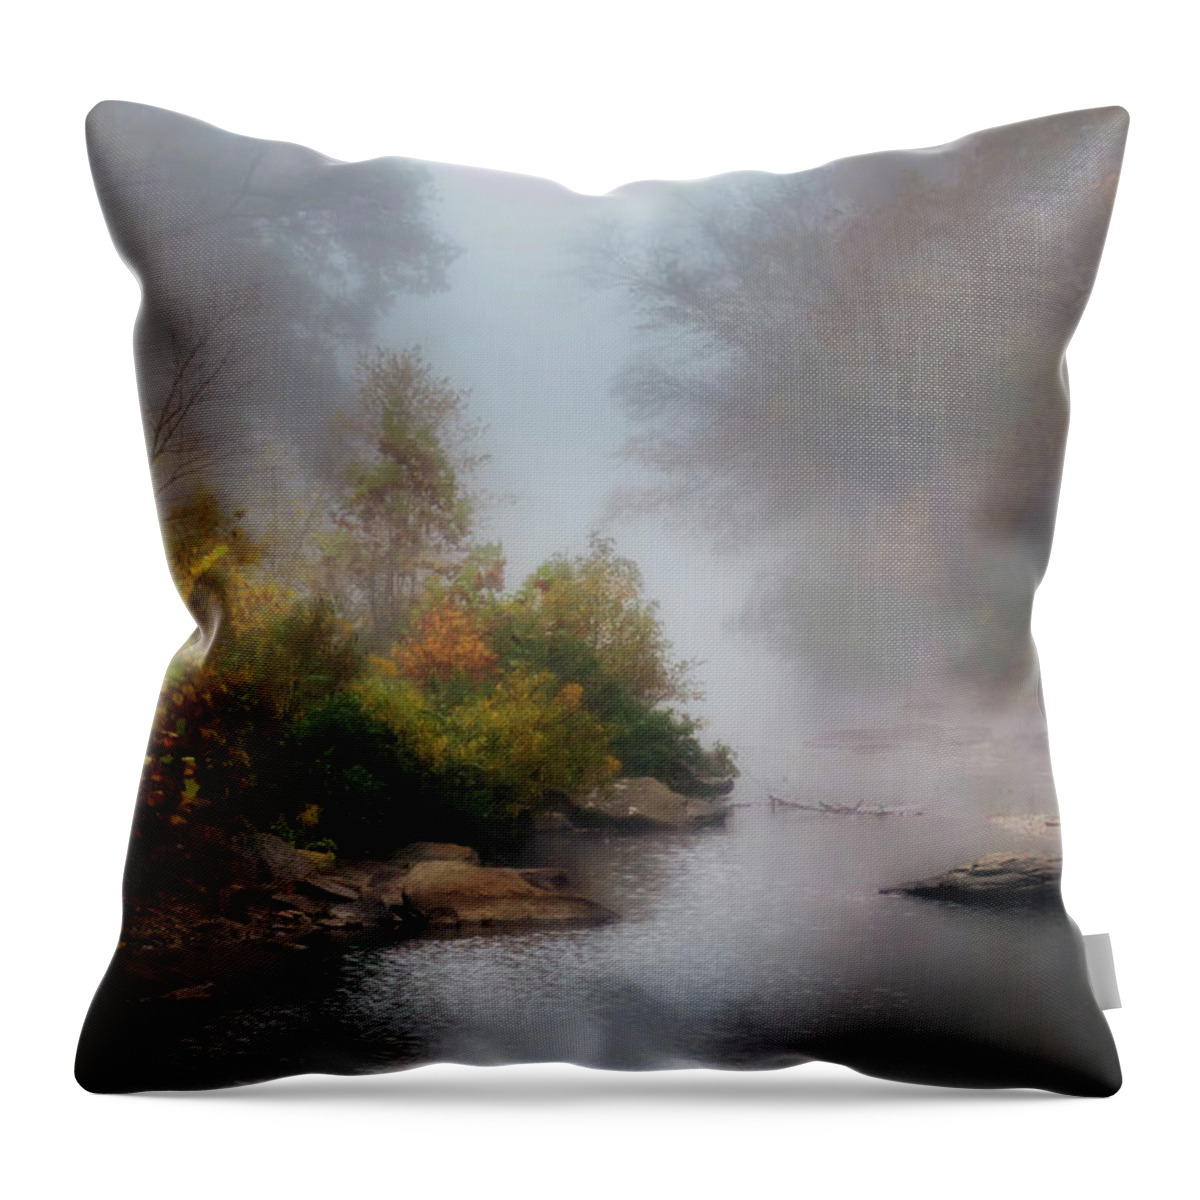 Painterly Throw Pillow featuring the photograph Lee Creek by James Barber